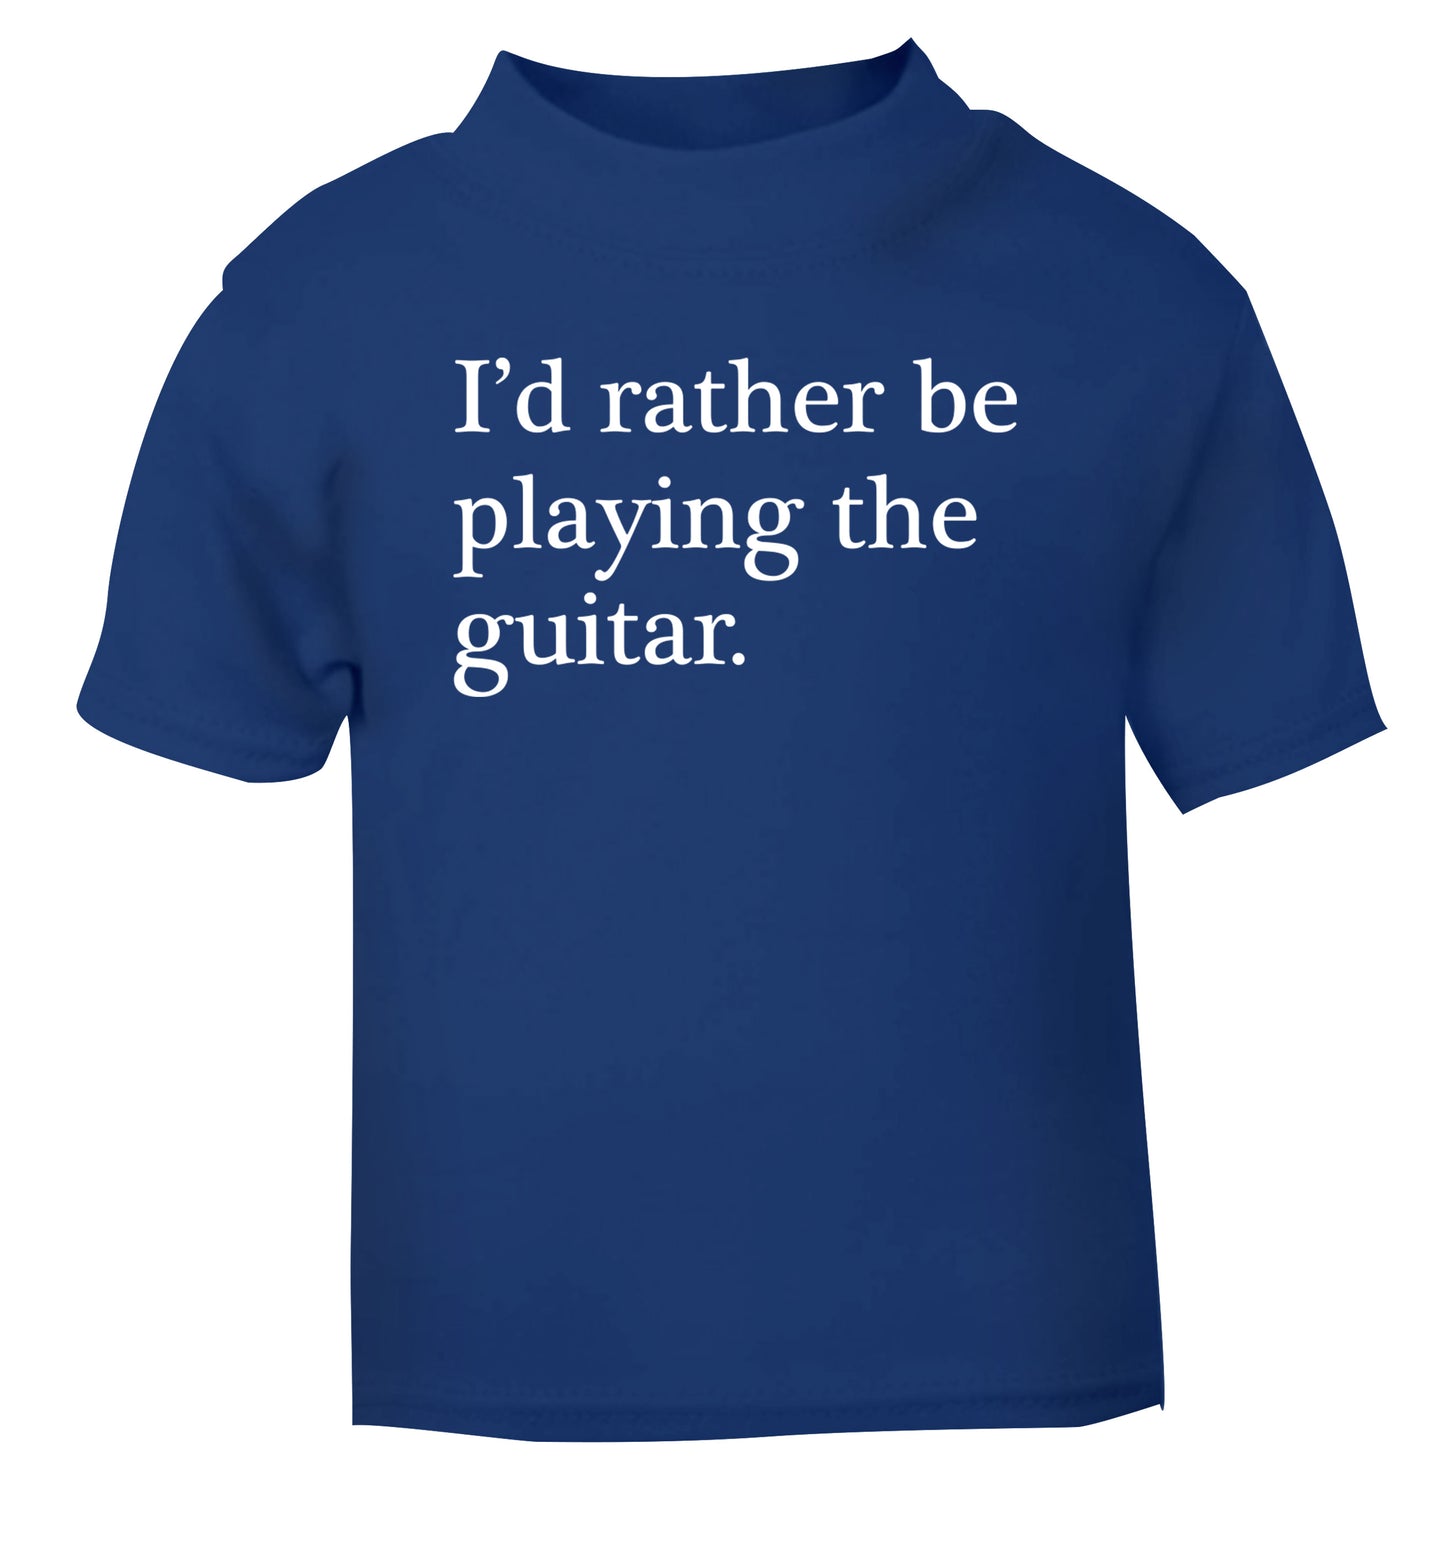 I'd rather be playing the guitar blue Baby Toddler Tshirt 2 Years